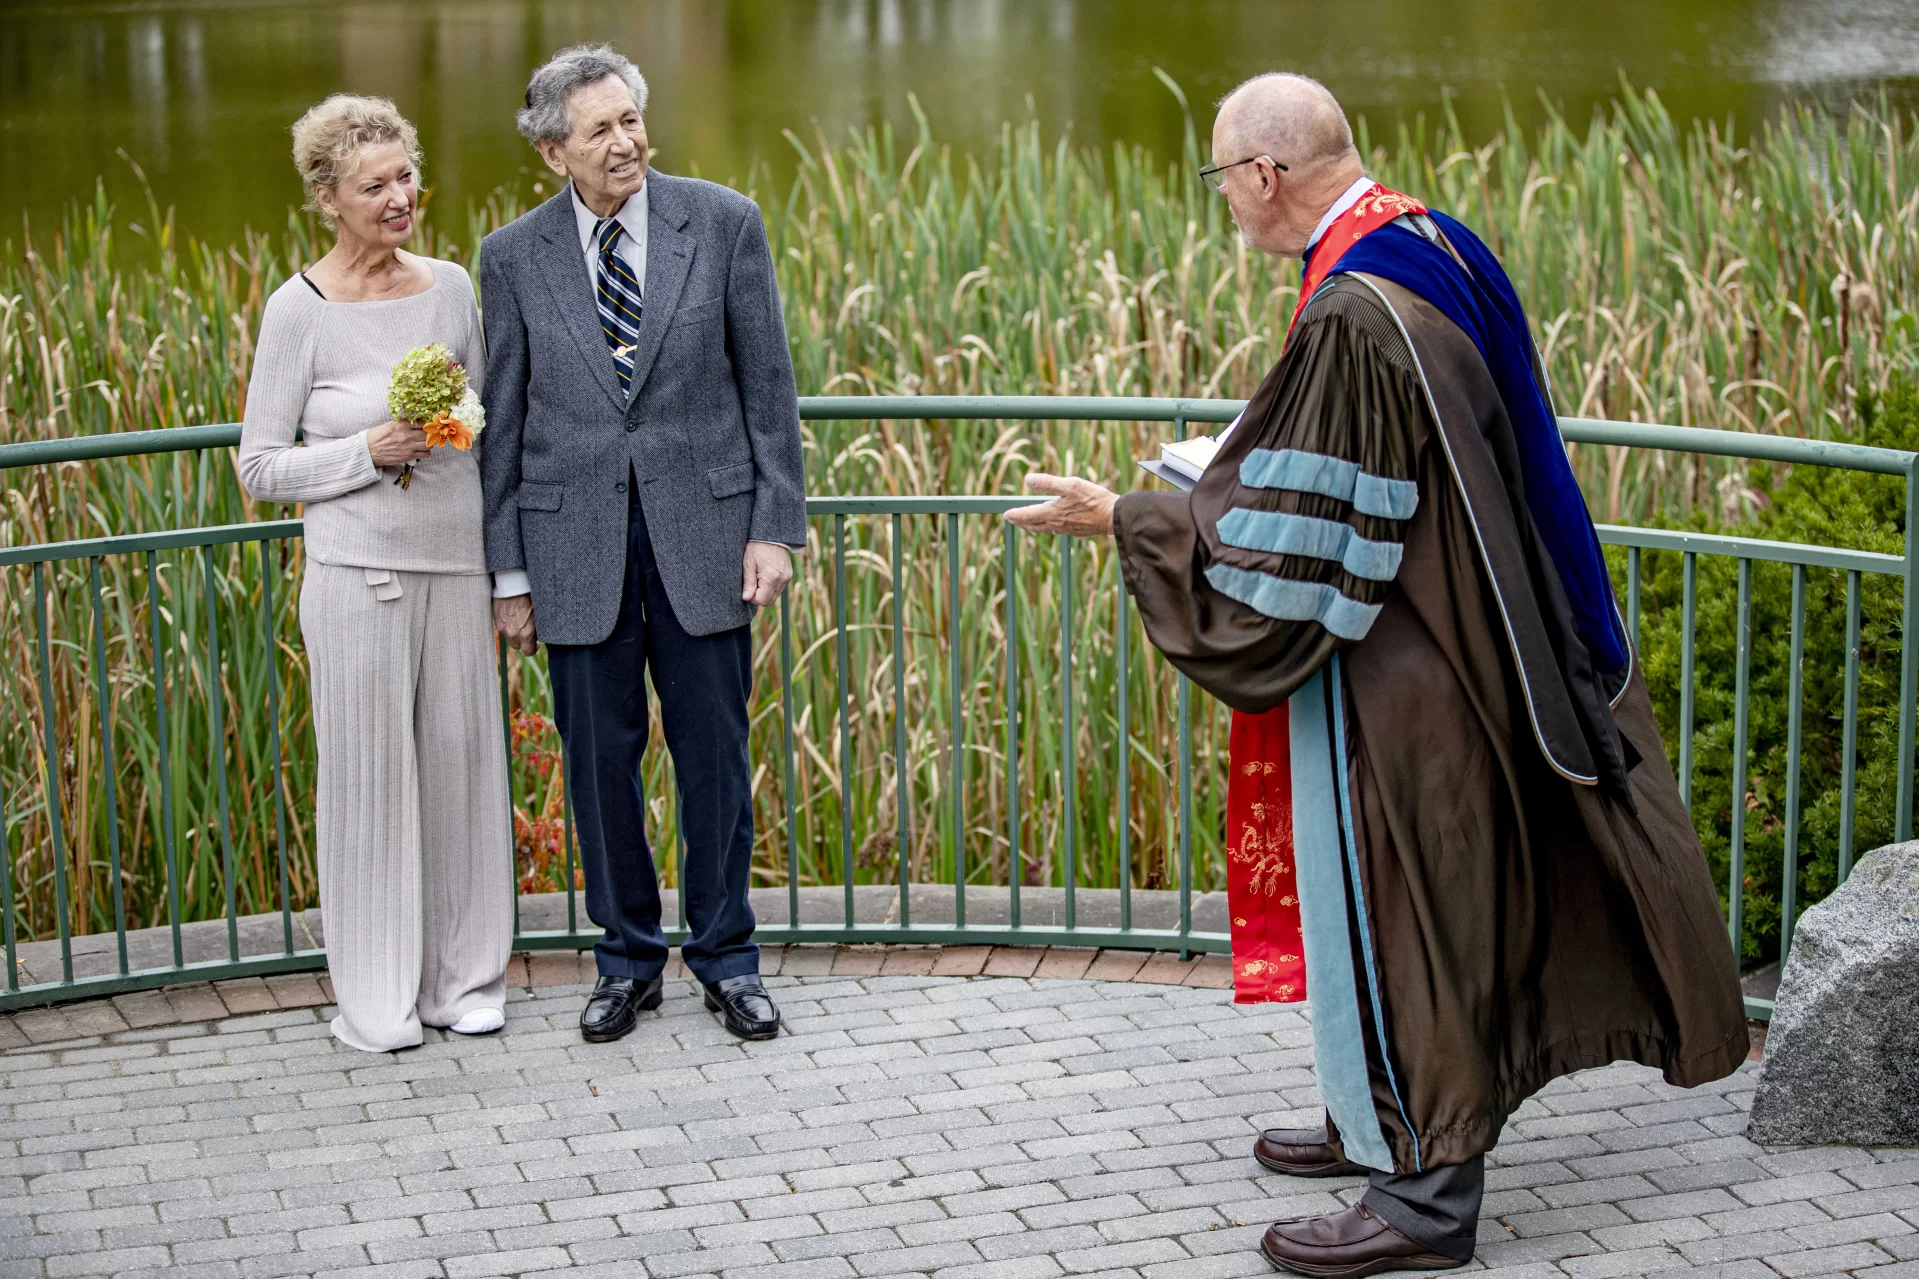 Bill Tucker ’66 and his wife of 31 years, Monica Drozd renew their vows at the Keigwin Amphitheatre on Friday, Sept. 24, in a ceremony officiated by Tucker’s classmate Bill Hiss ’66 and witnessed by Leadership Gift Officers Cary Gemmer Blake ’07 and Rebecca Lazure, both of Advancement. Also present was Colleen Quint ’86 and BCO writer Jen Wright.Hiss writes: “Bill and I had adjoining rooms in what is now Turner House in 1965-6, and have been clise friends ever since. Bill’s Bates story is a fascinating and very unconventional one…He first arrived in the late 1950’s, and with 4 years in between of active duty as an Army MP, finished in 1967. He then set a speed record for a Princeton Ph.D. In psychometrics, and moved into Camden, NJ, where he spent his entire career as a Psychology prof at Rutgers Camden. He wrote some masterful scholarly books both on the use of testing (an interest we have shared for decades), and on the hidden work of truly nasty right-wing foundations. To say that Bill has a lifelong commitment to racial and social justice is a big understatement.”“His Bates and family story is powerfully American: his paternal grandfather deserted from the Czar’s army as a Jewish conscript and walked from the Caucasus to Rotterdam to get a boat to America. His mother’s family, Viennese Jewish intellectuals, got out of Austria barely ahead of the Gestapo. Bill’s use of his Bates education has been masterful, and his philanthropic support goes to issues of racial justice, including some quiet support of bringing minority students from Camden to see Bates.”